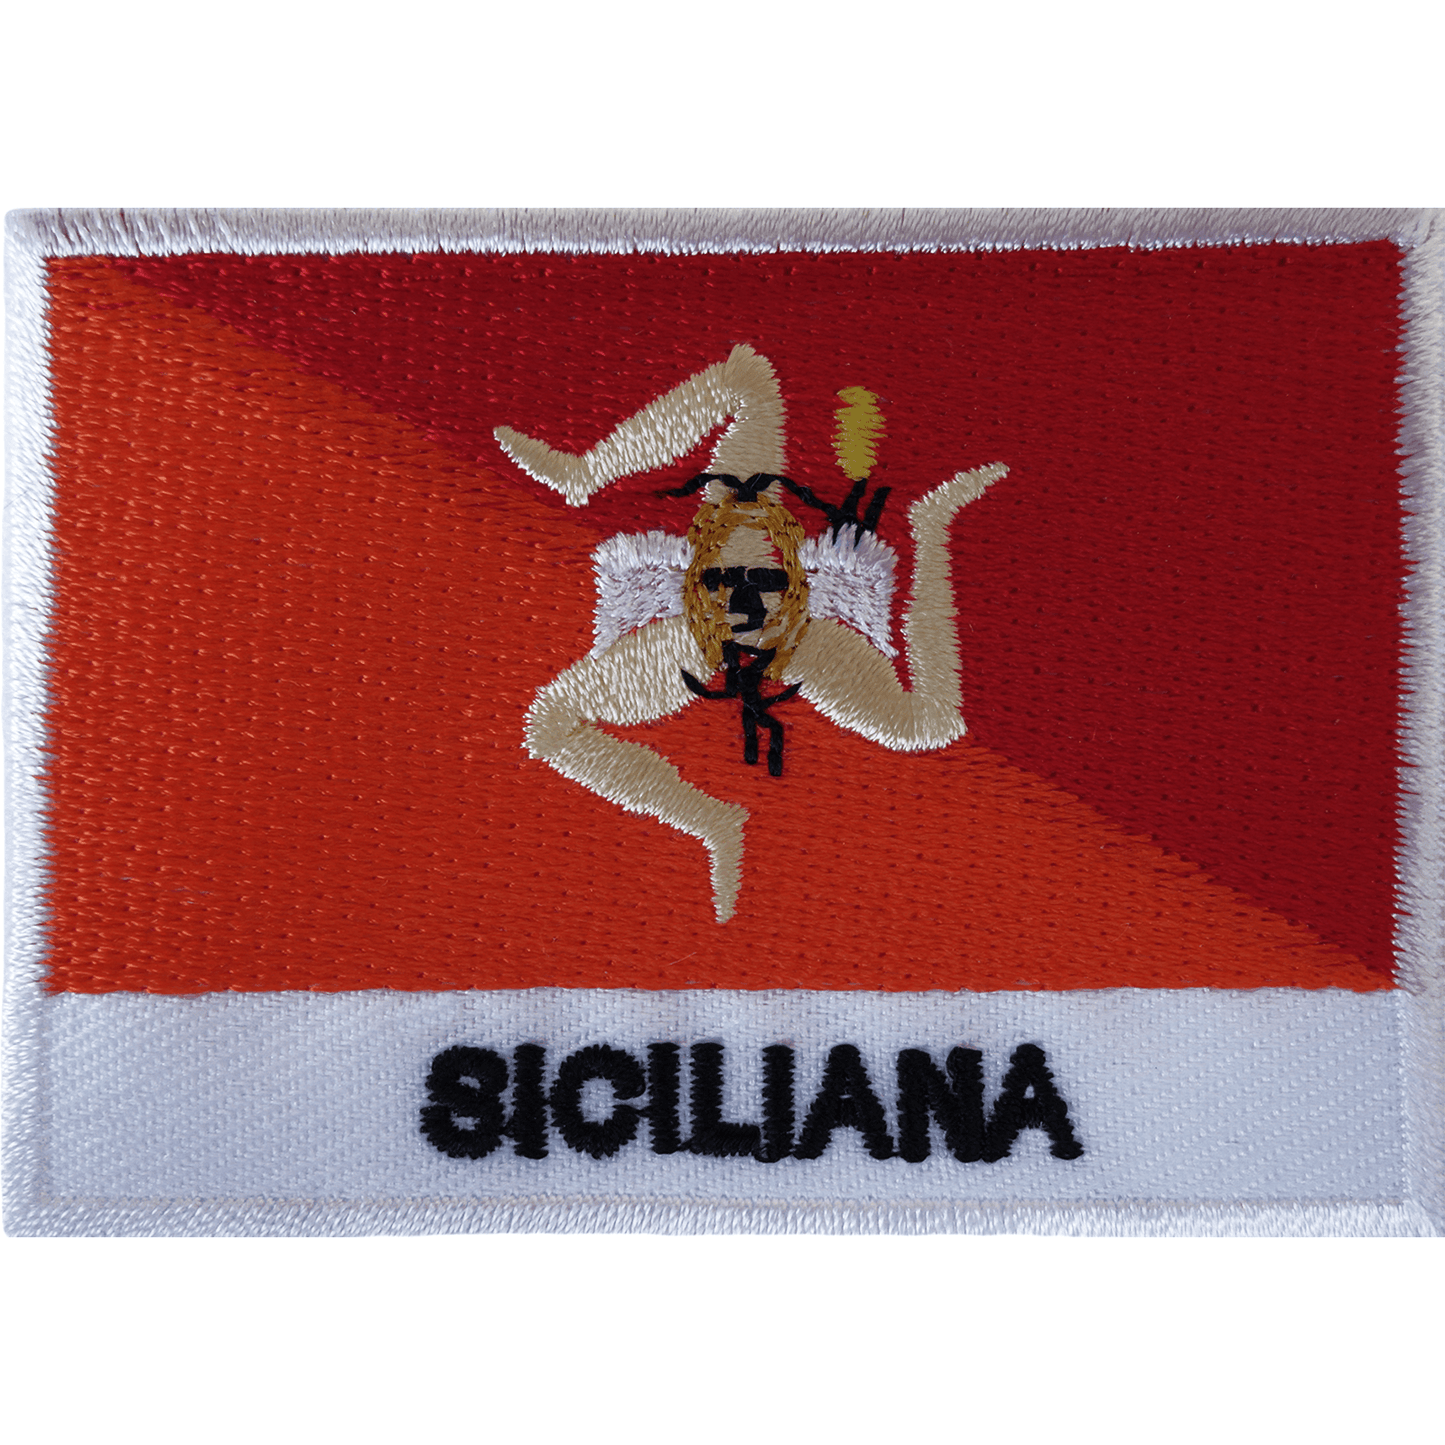 Sicily Flag Iron On Patch Sew On Cloth Siciliana Italy Italian Embroidered Badge